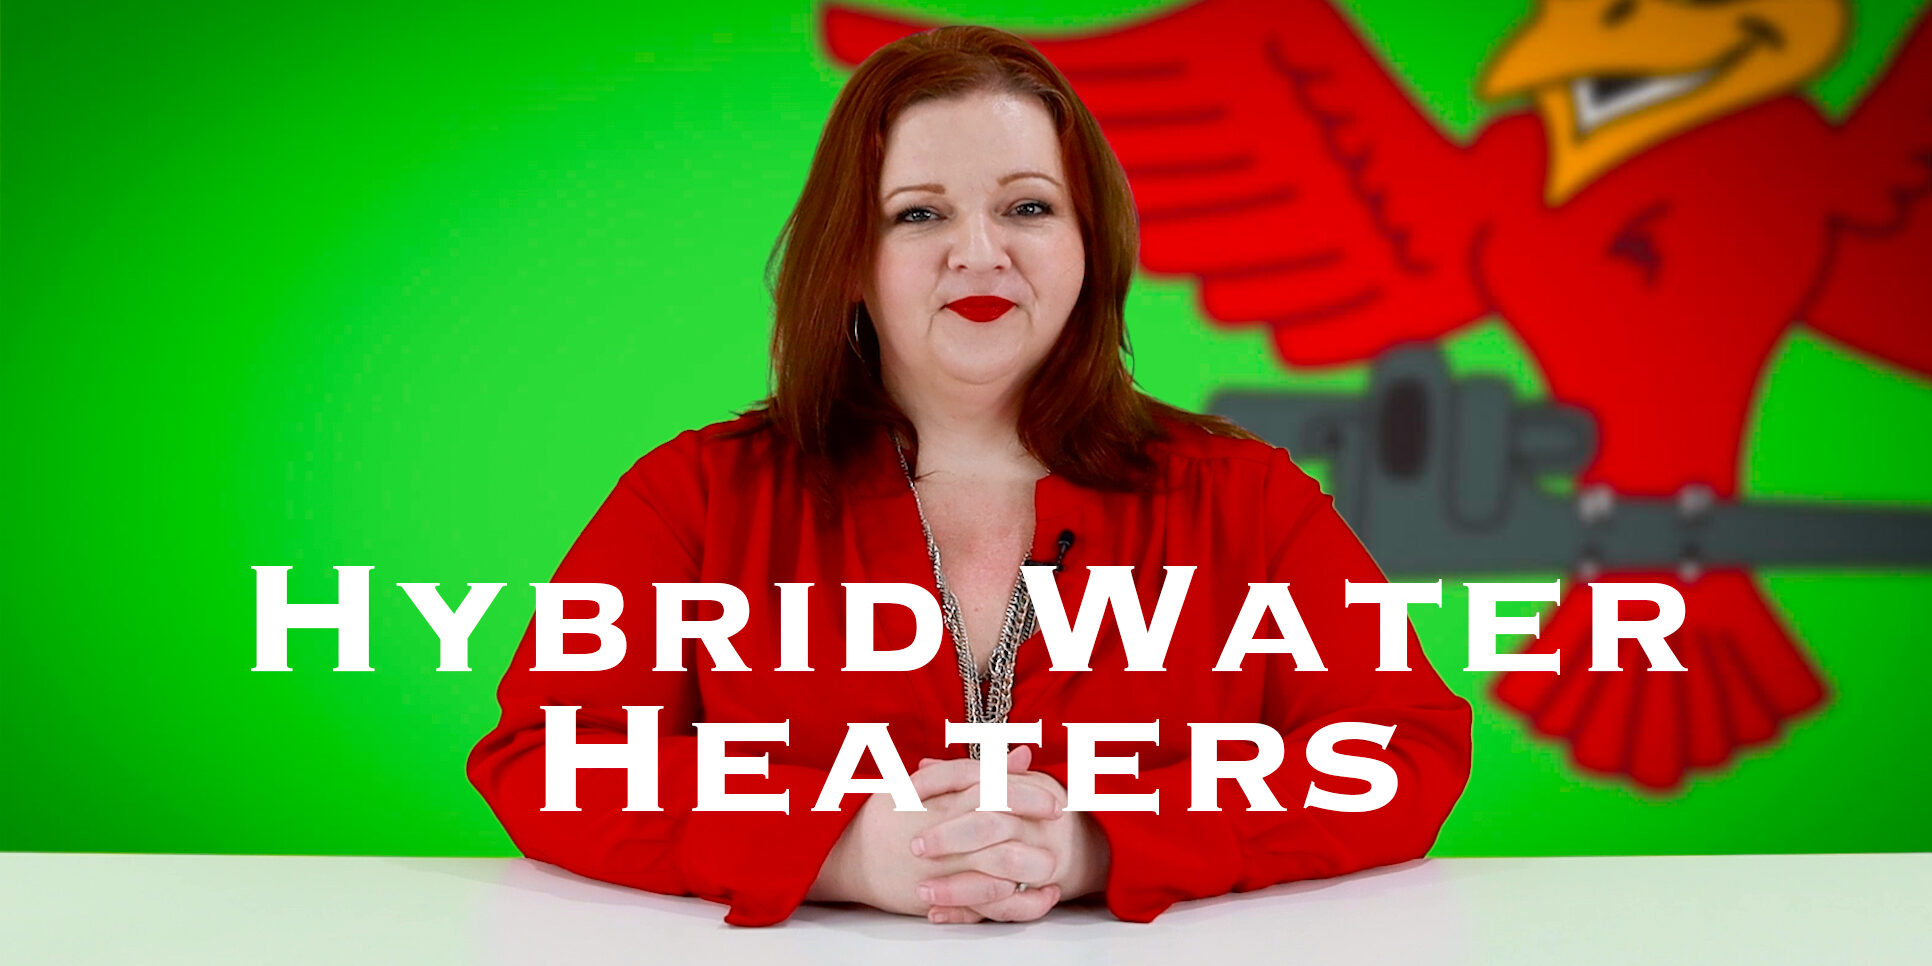 Cover photo for blog and video "Pros and Cons of Hybrid Water Heaters"